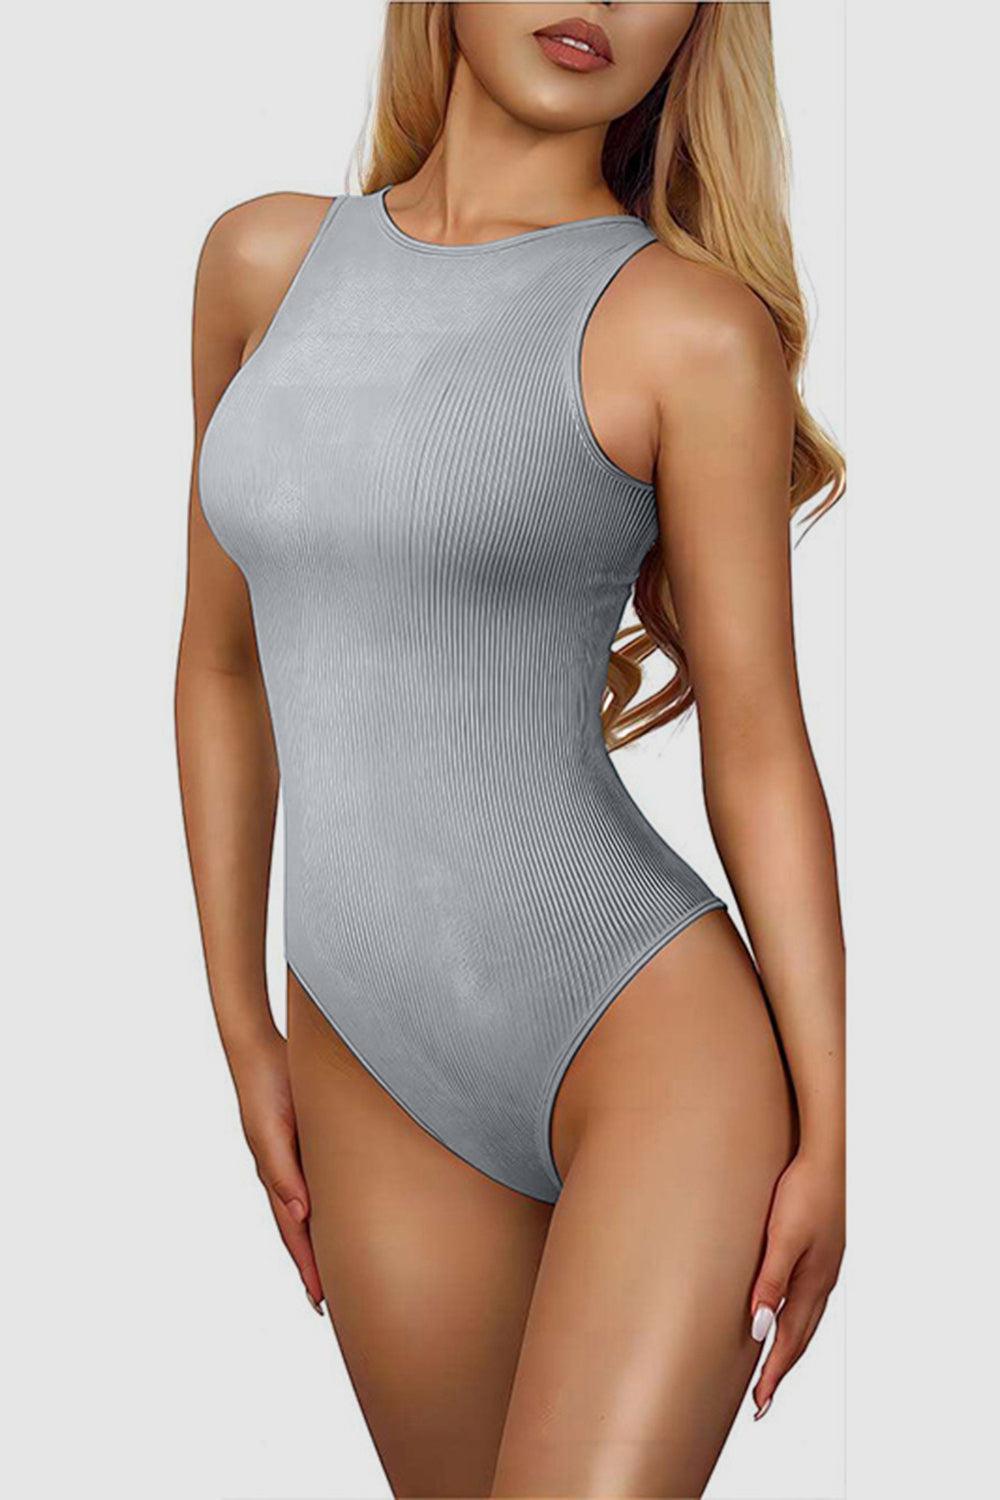 a woman in a gray bodysuit posing for a picture